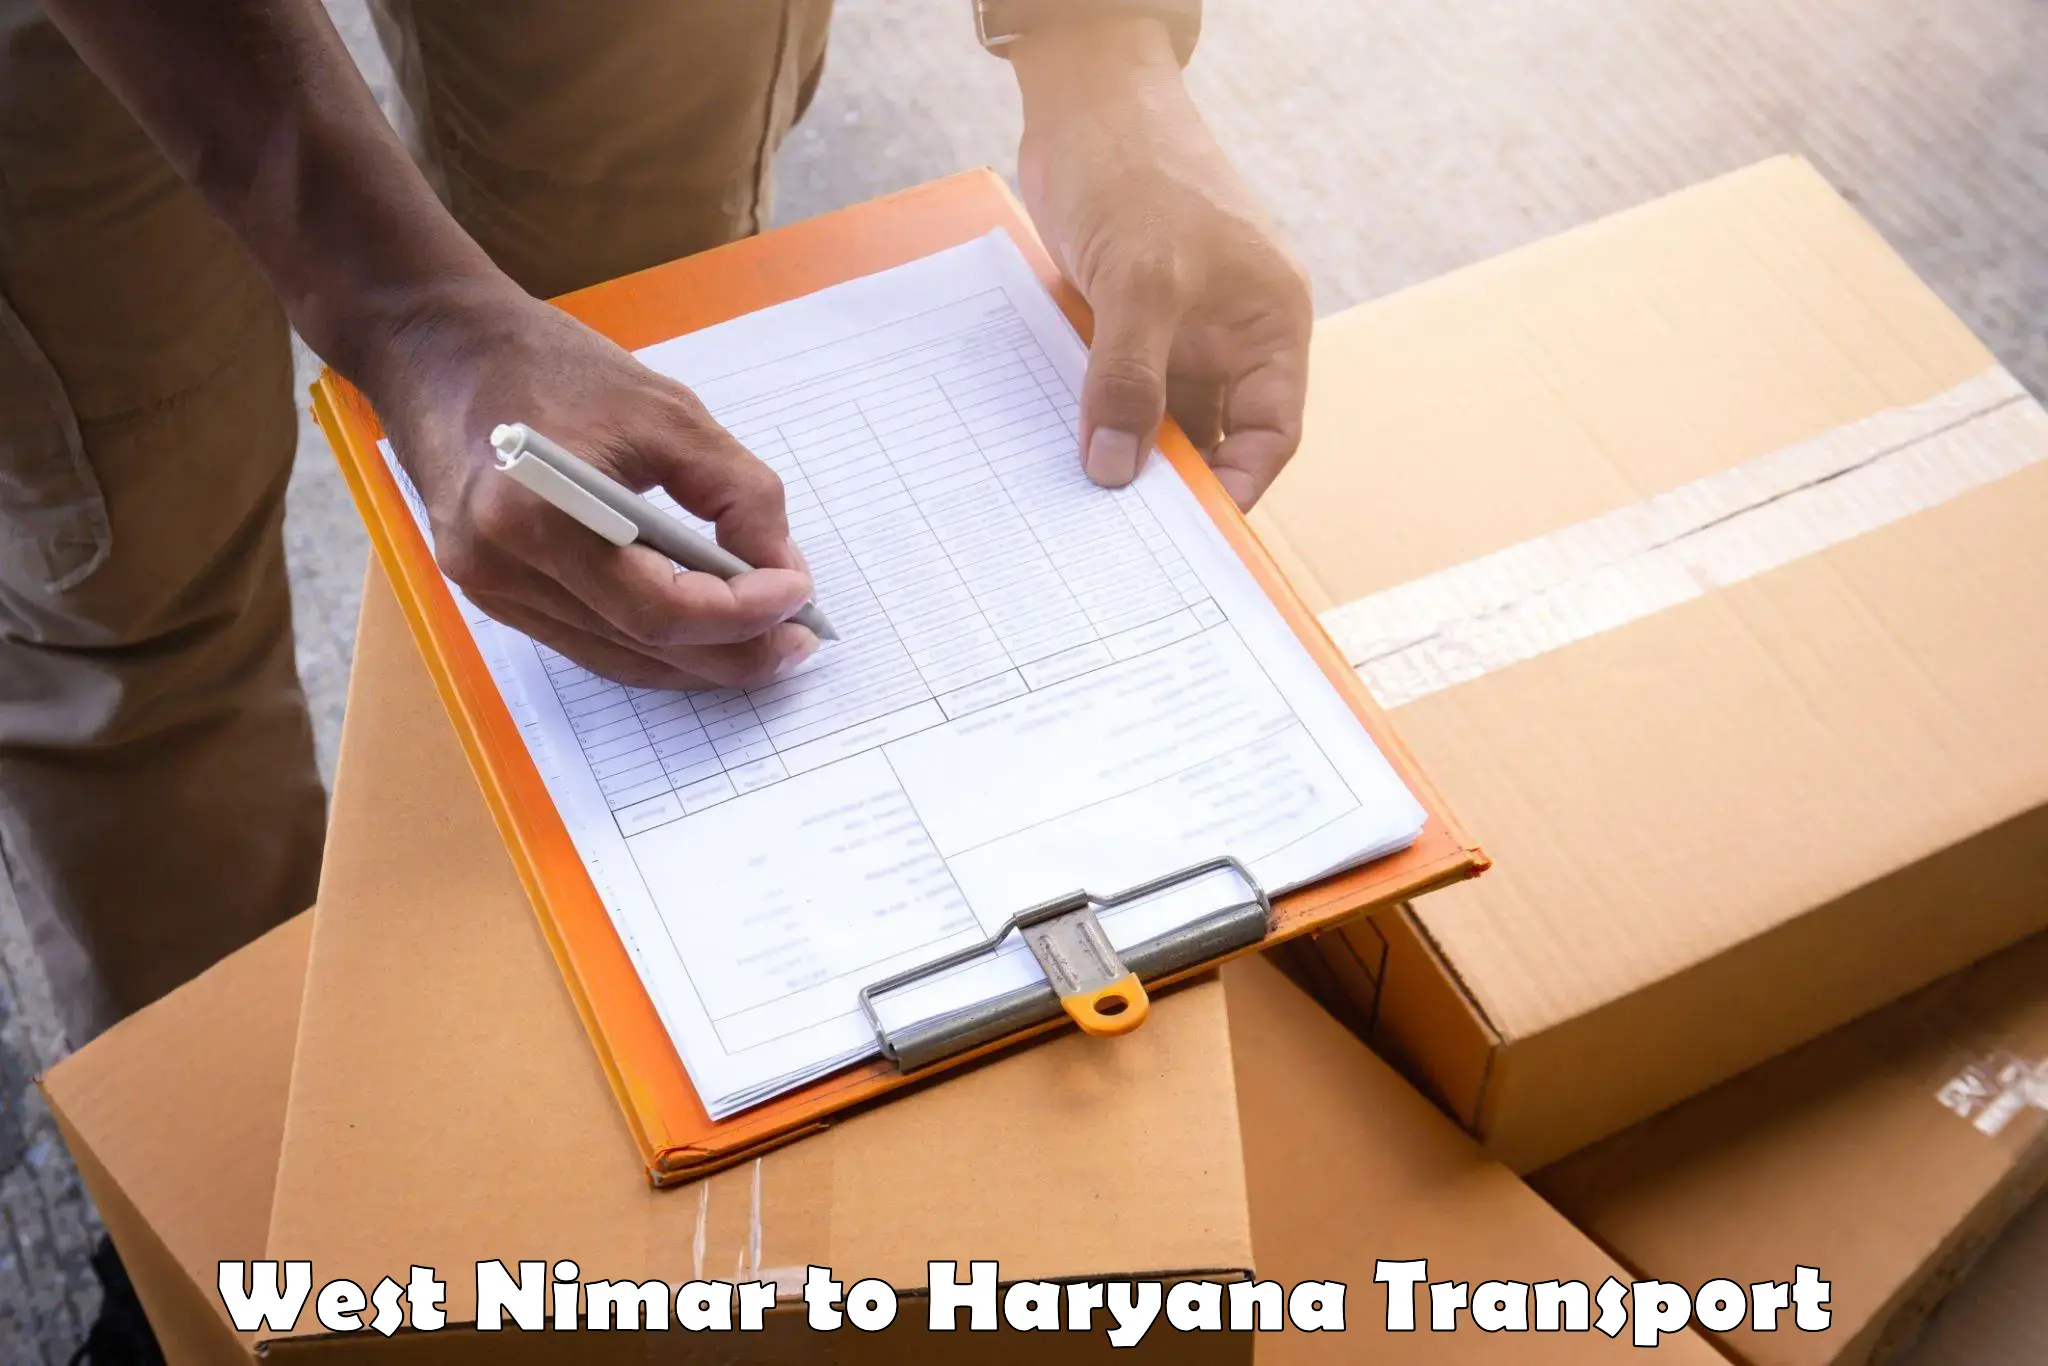 Container transportation services West Nimar to Bilaspur Haryana